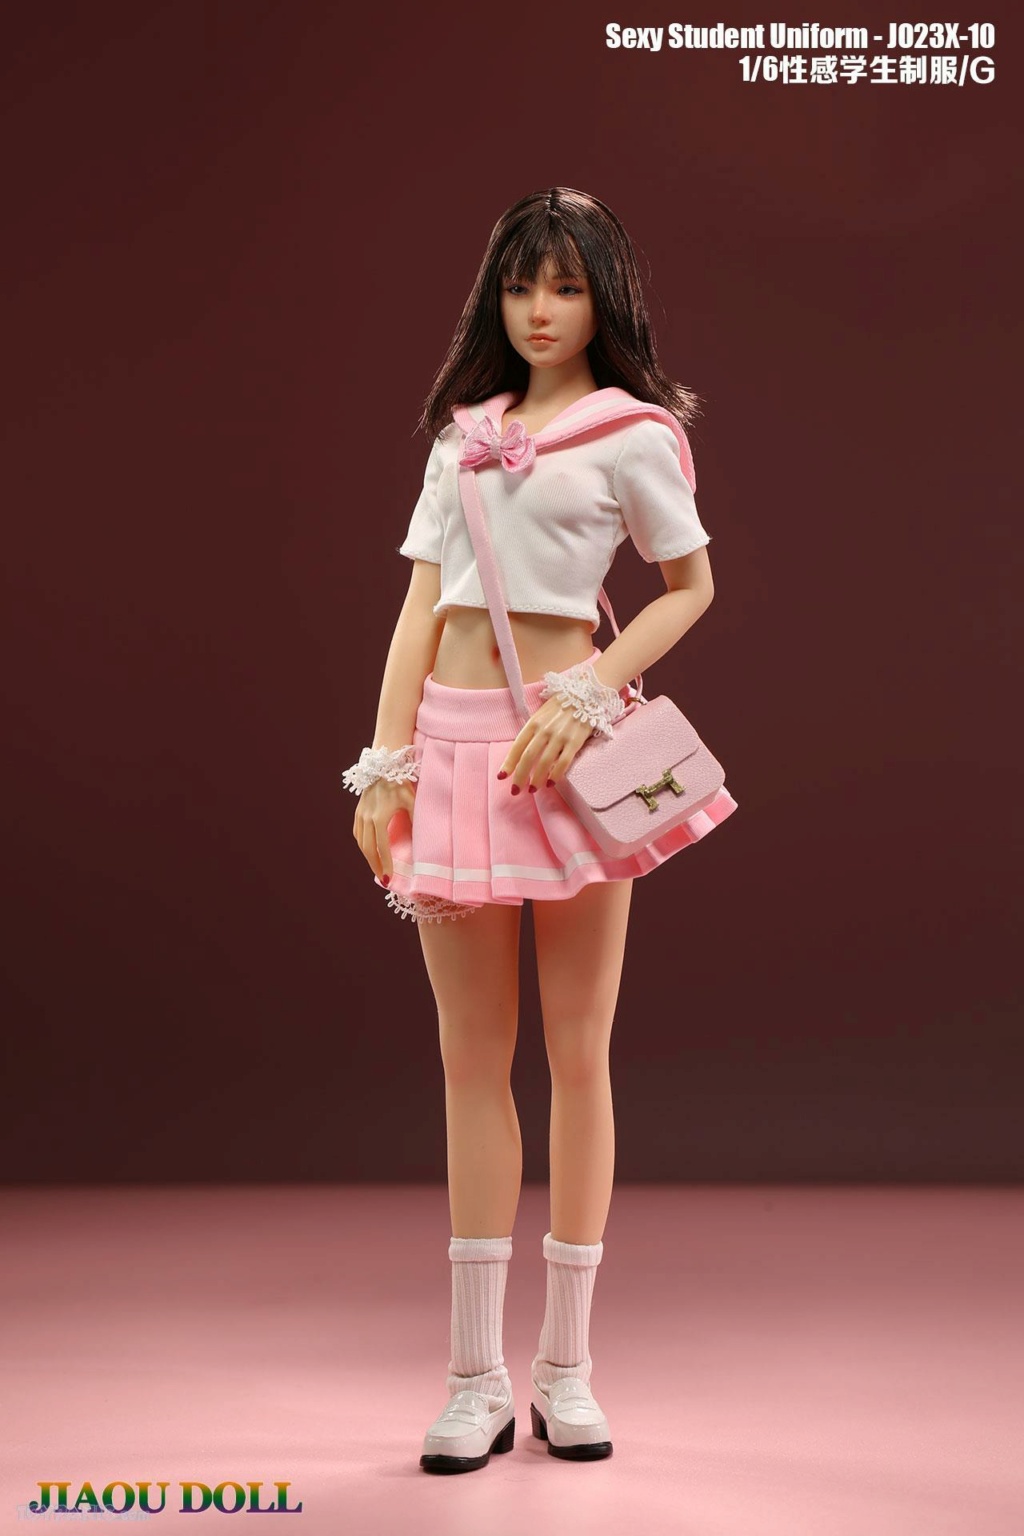 Clothing - NEW PRODUCT: Jiaou Doll: 1/6 Sexy Student Uniform (7 color options) (JO23X-10A-G) (NSFW) 20920242